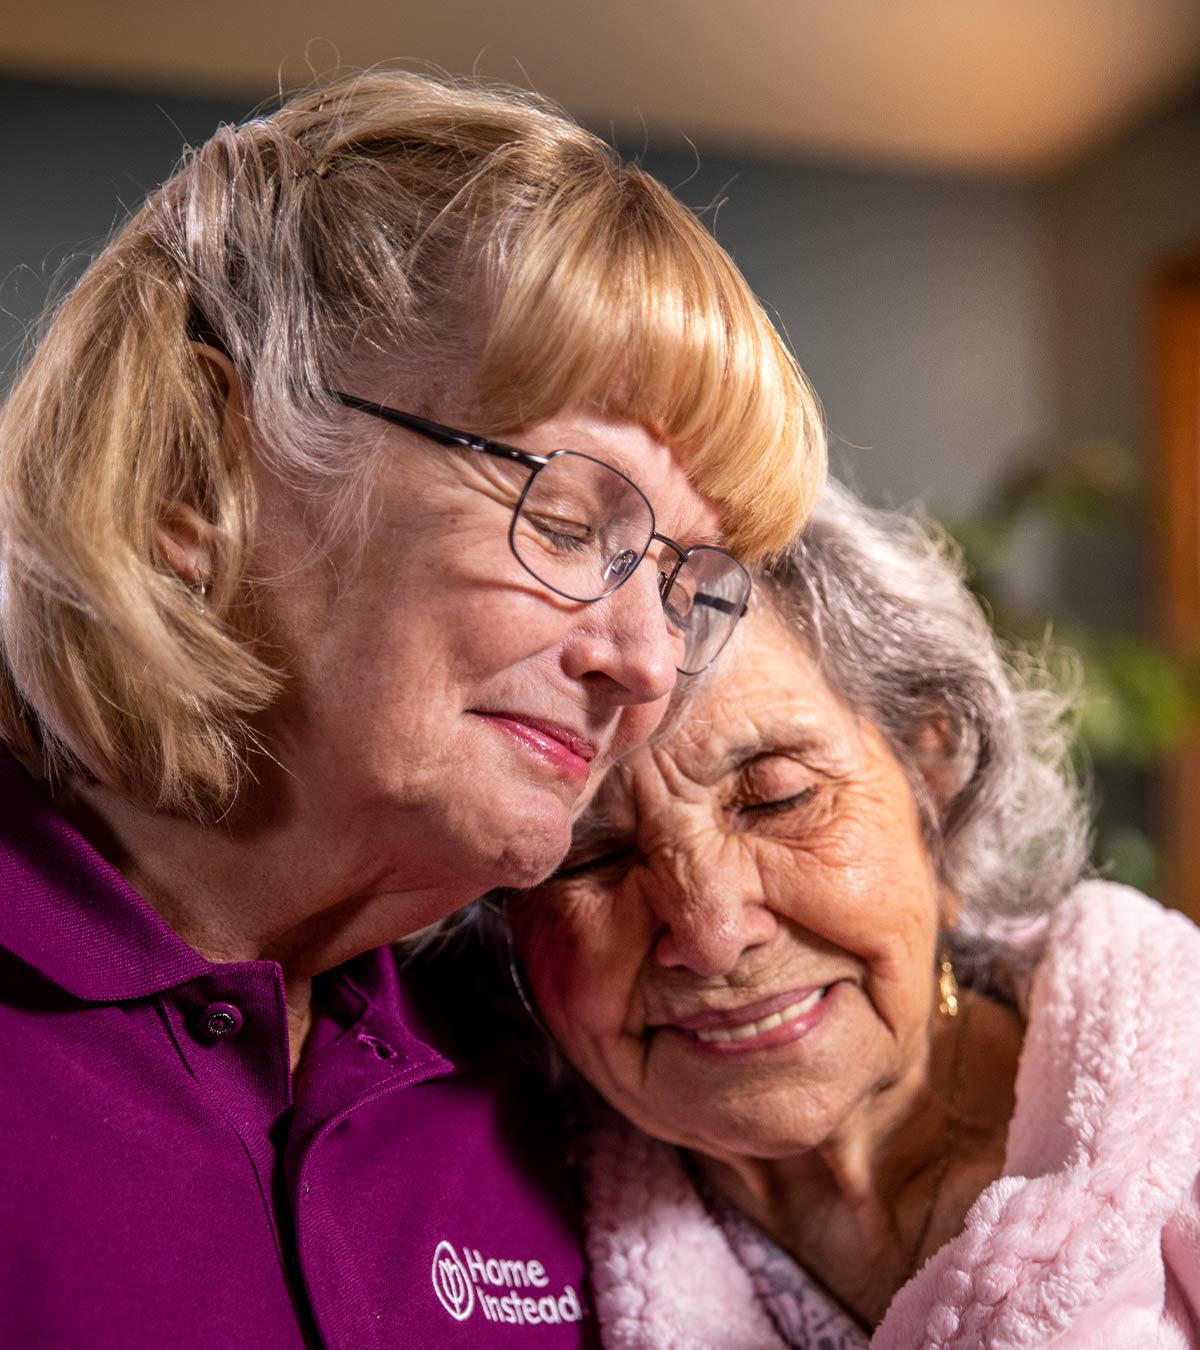 CAREGiver providing in-home senior care services. Home Instead of Waterloo, IA provides Elder Care to aging adults. 